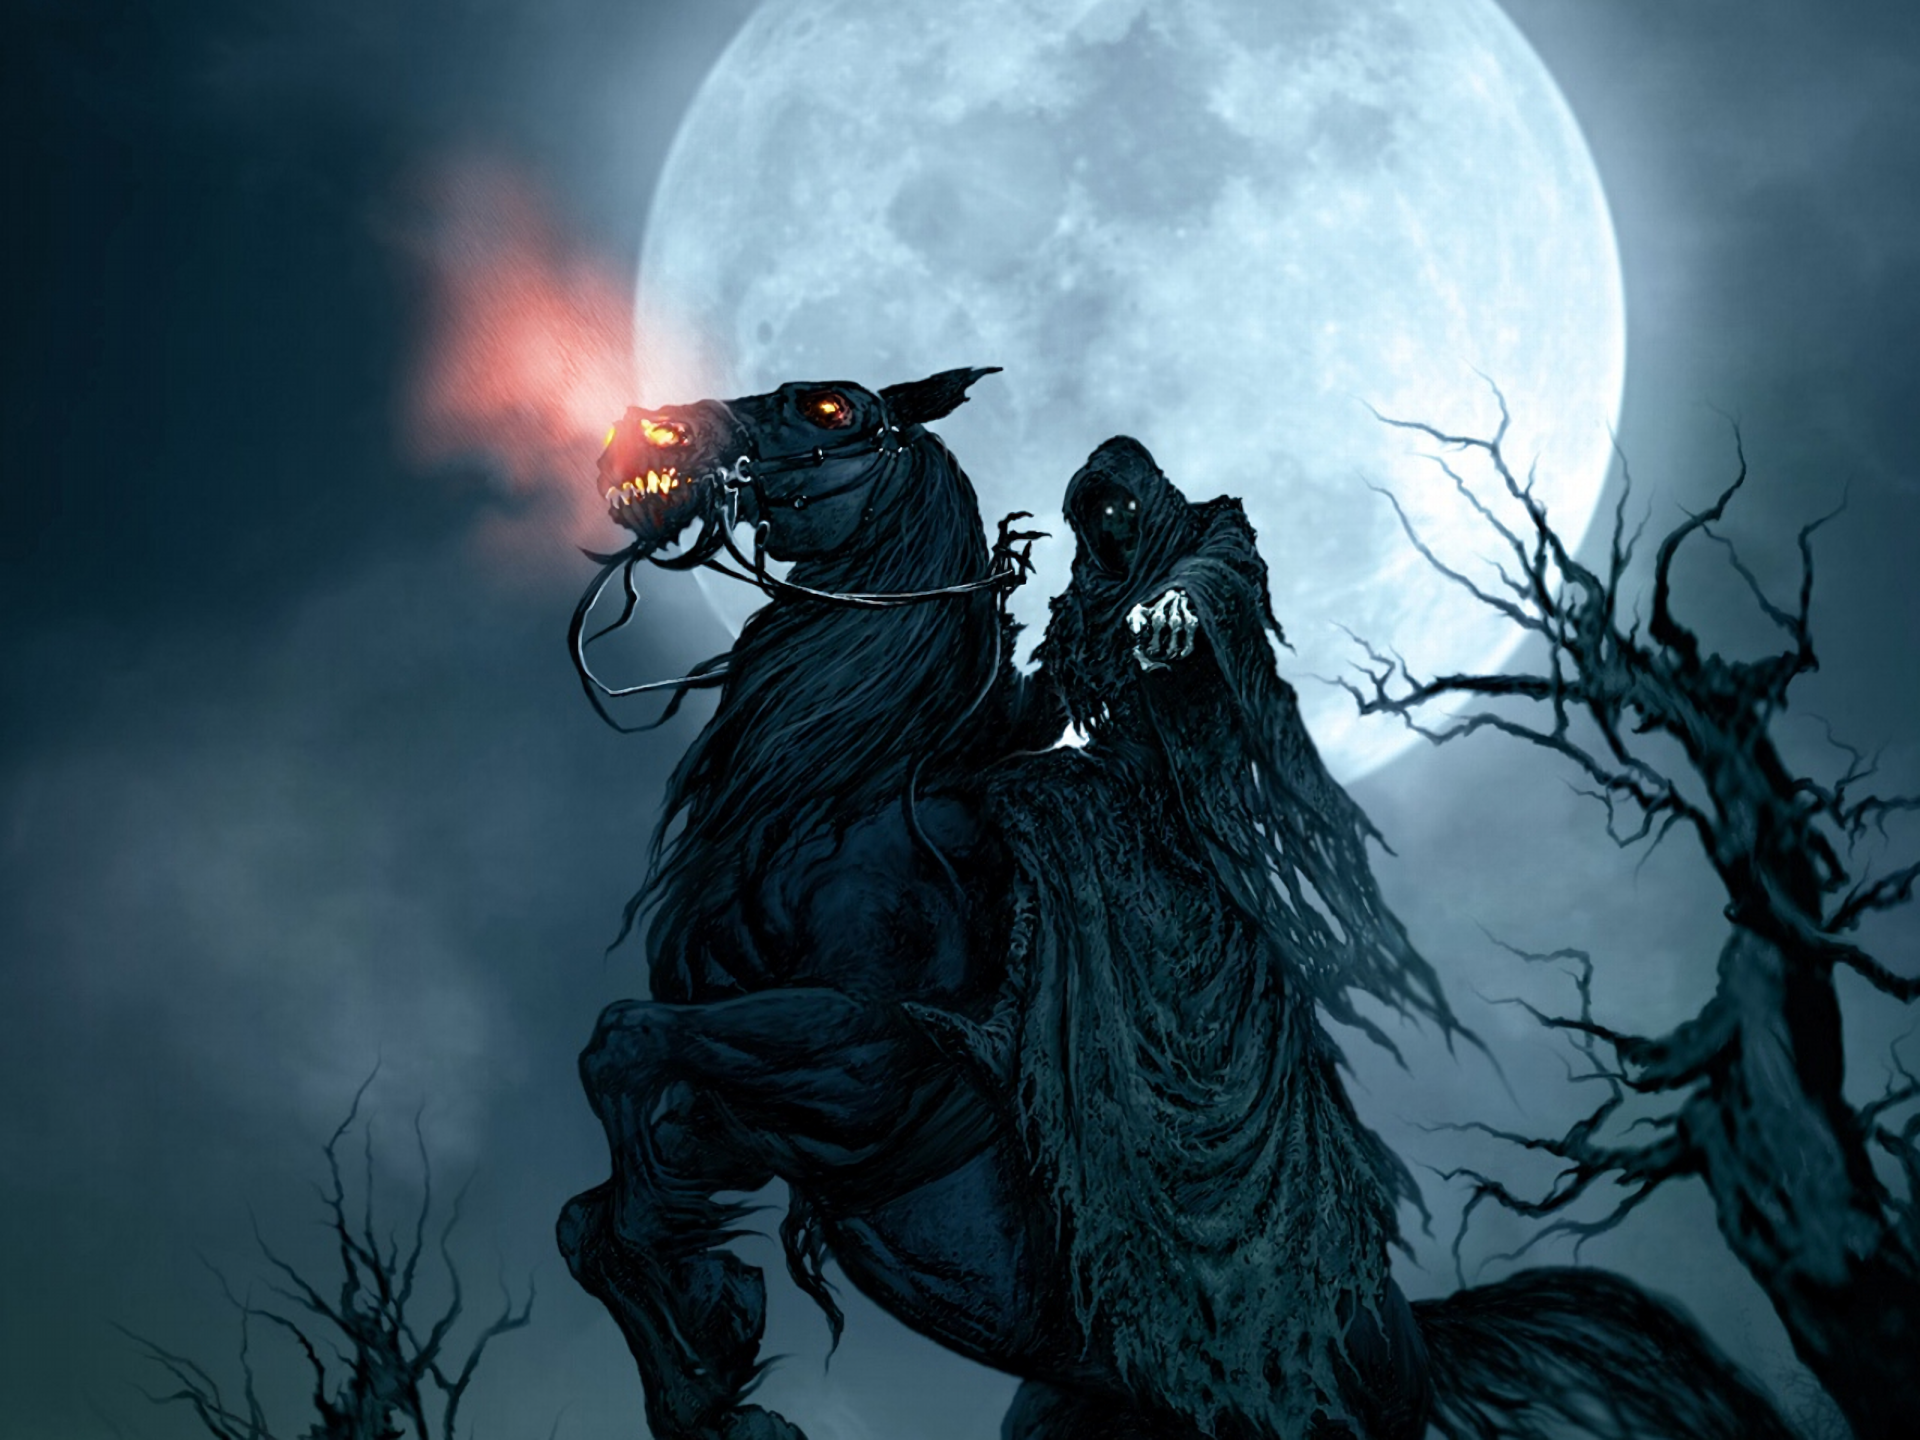 Dark fantasy wallpaper featuring a Grim Reaper on a horse under a moonlit sky named 'Your Next'